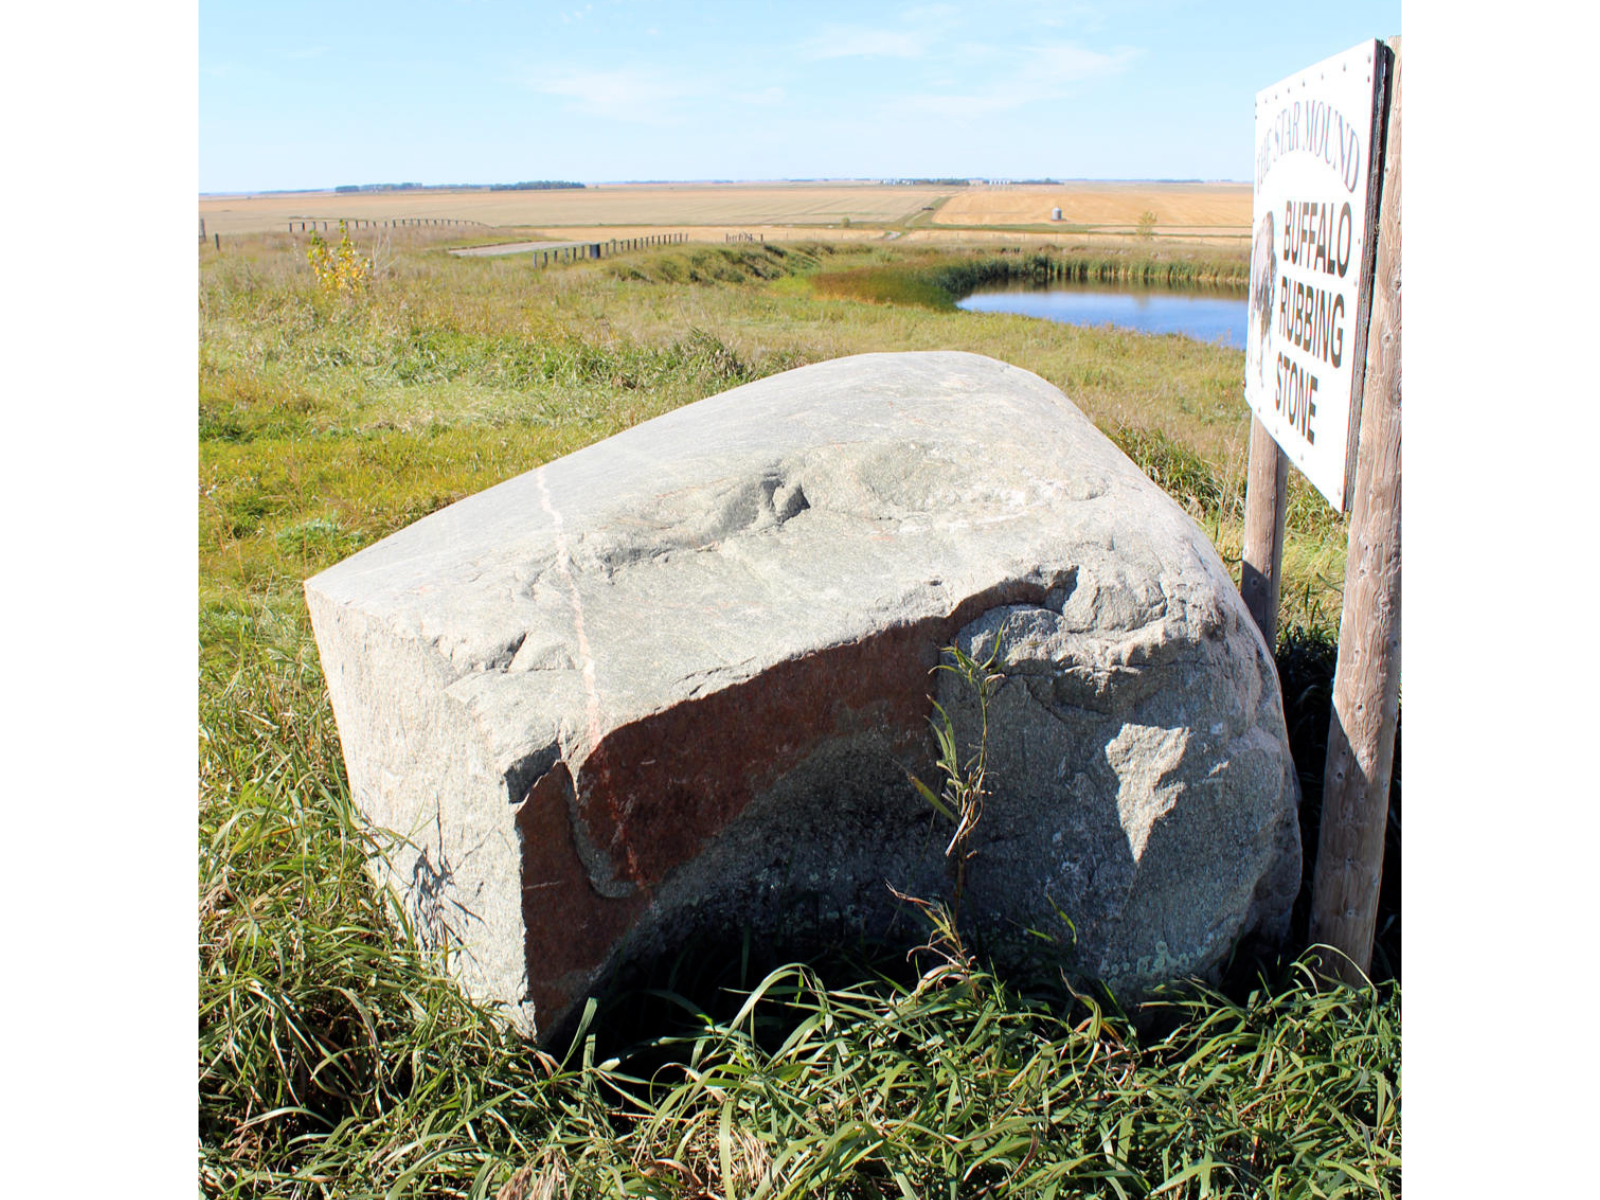 A large grey boulder in the grass next to a sign angled away from the camera that cannot be read. The top and sides of the boulder are slightly rounded.